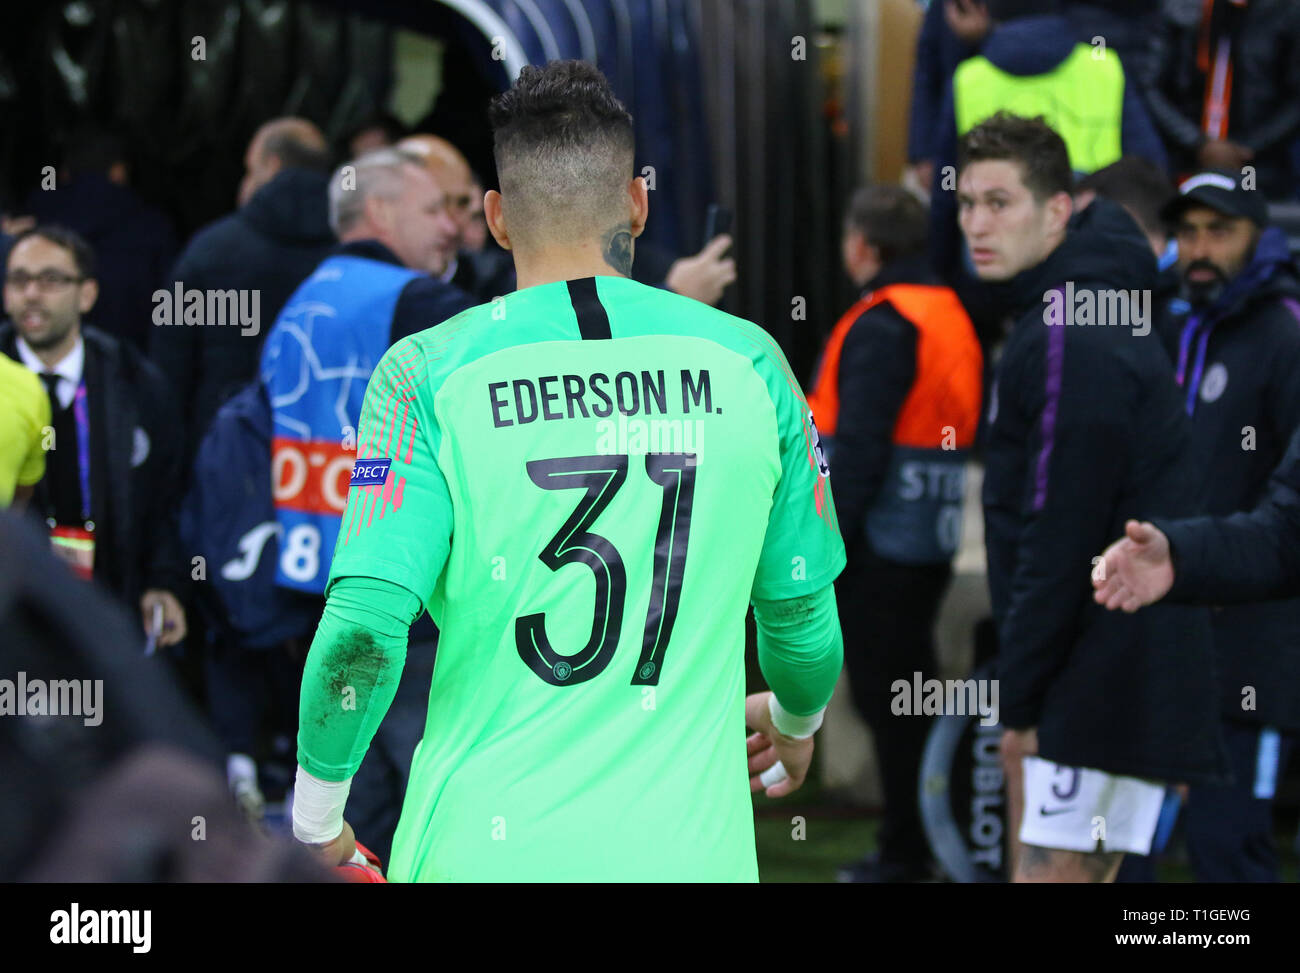 ederson jersey number